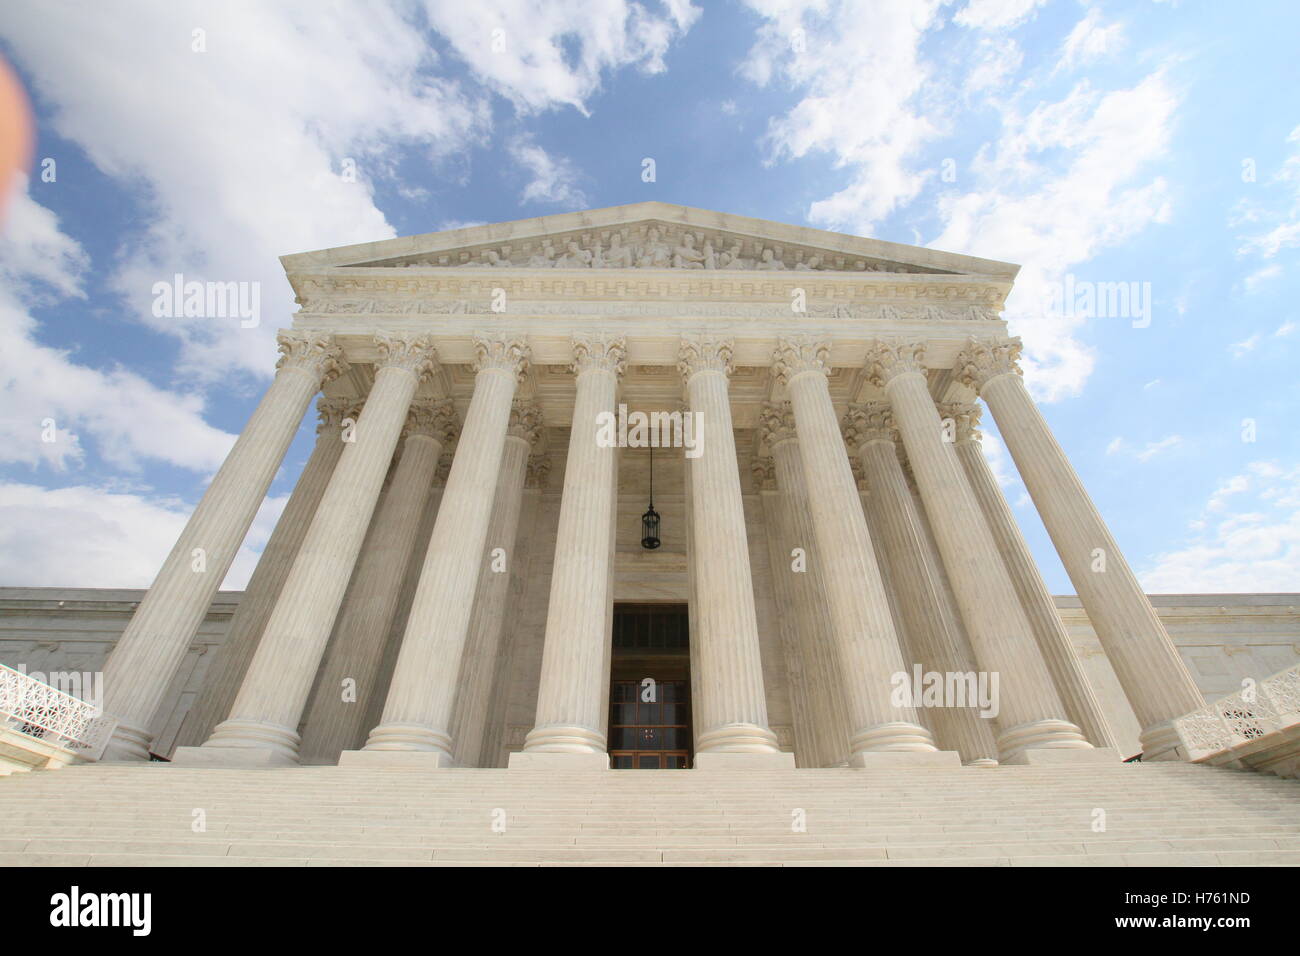 The front and inside of the Supreme Court Washington, dc Stock Photo